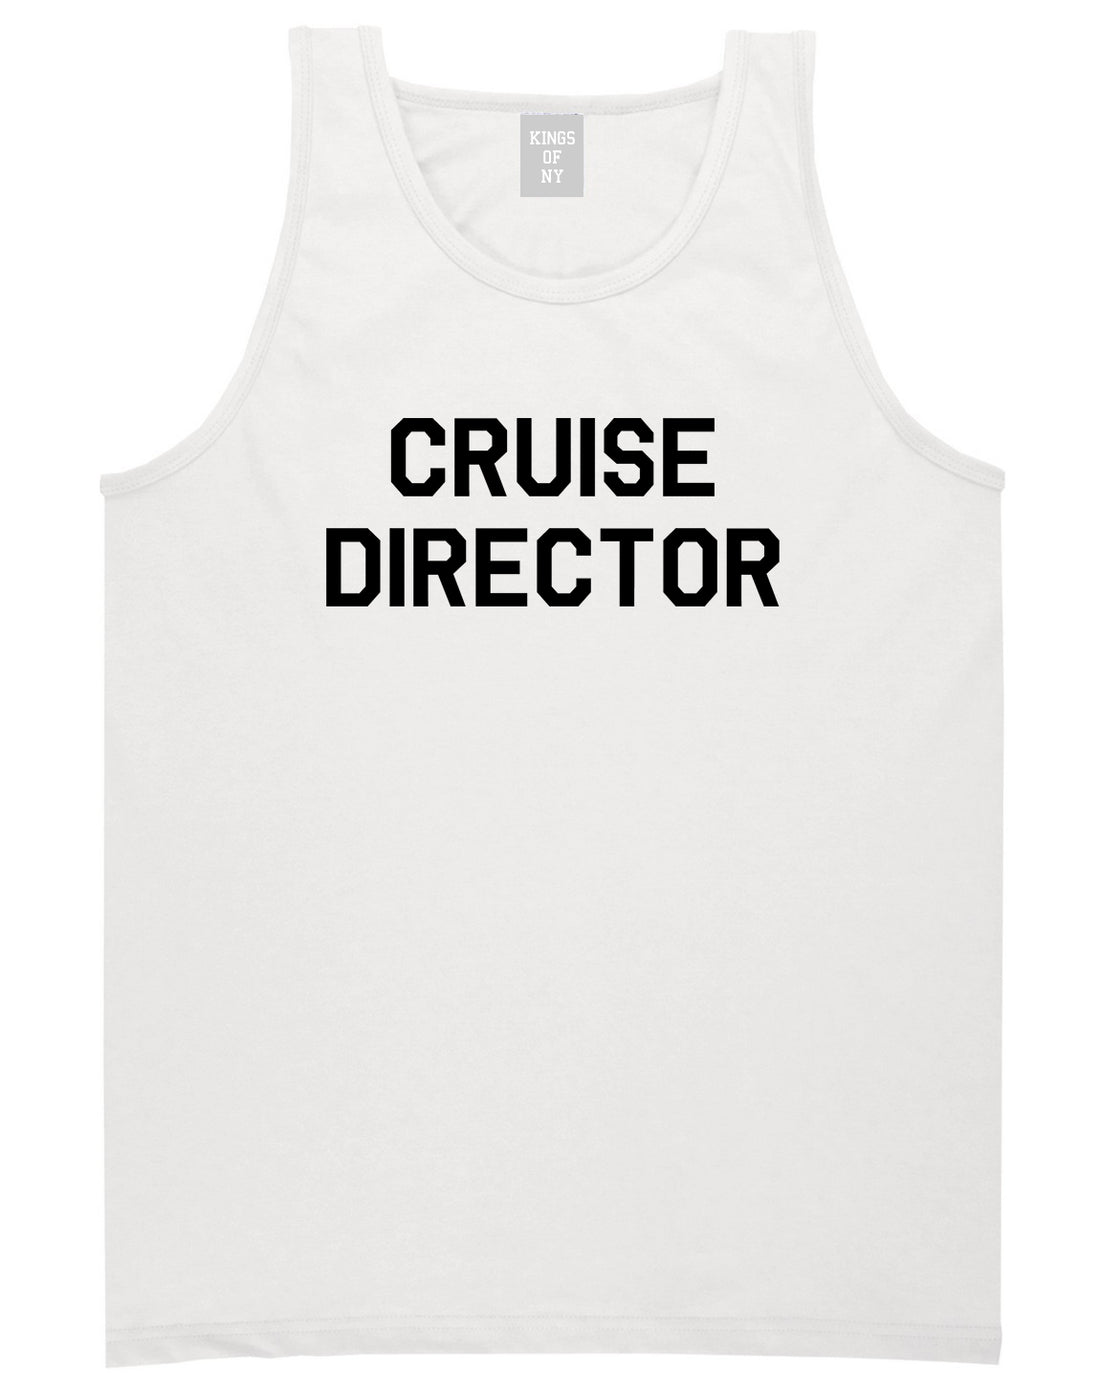 Cruise_Director Mens White Tank Top Shirt by Kings Of NY